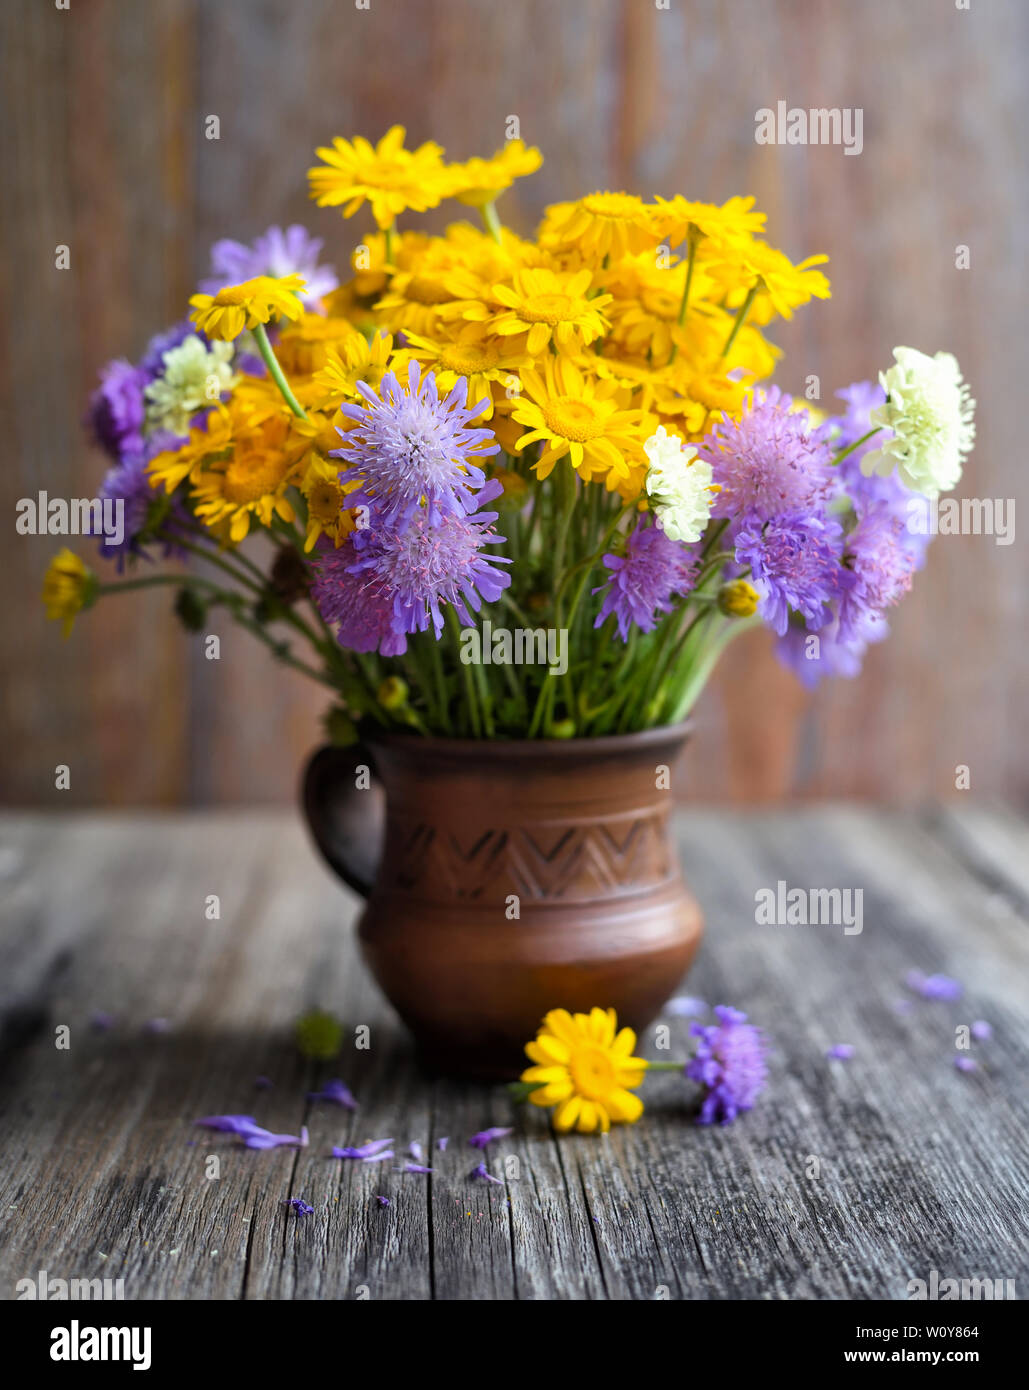 Bouquet of wildflowers (Anthemis tinctoria and Knautia arvensis) in a ceramic jug on the table Stock Photo